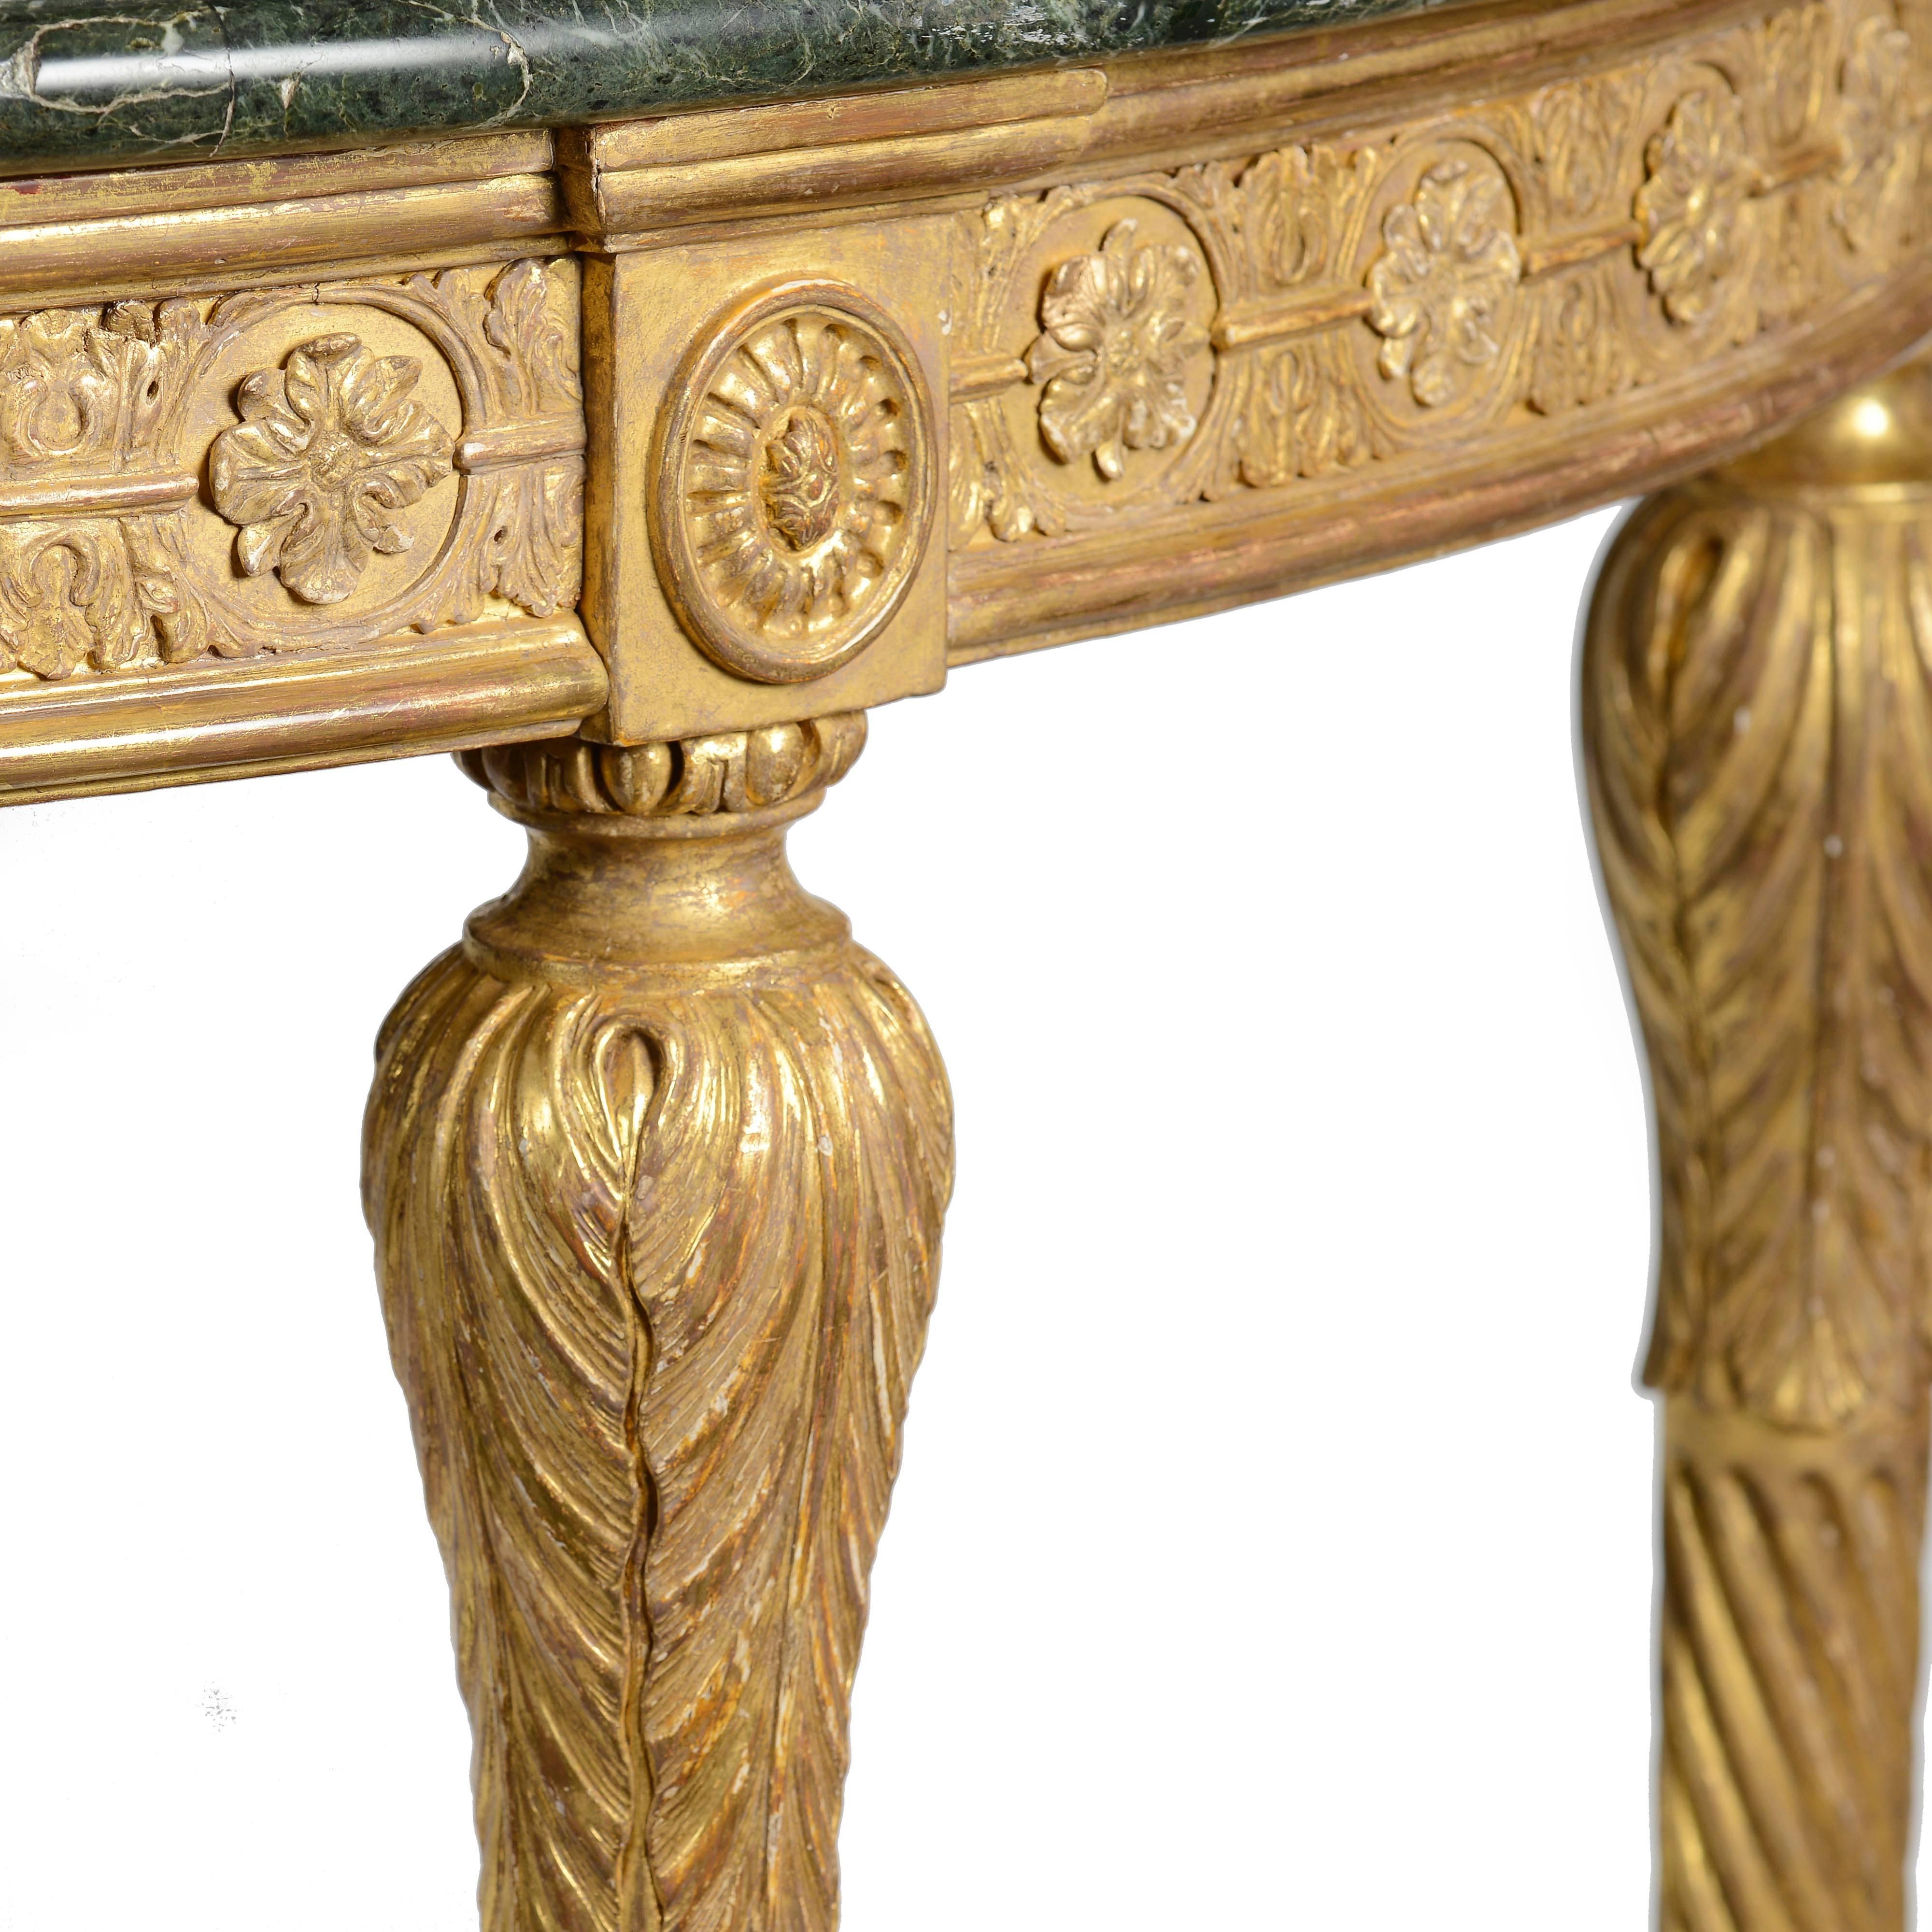 Description: A fine George III Adam period carved giltwood demi-lune pier table. The carved frieze with alternating flower rosettes inset into an acanthus leaf chain, bordered top and bottom by ovolo and demi-lune mouldings. The legs of turned